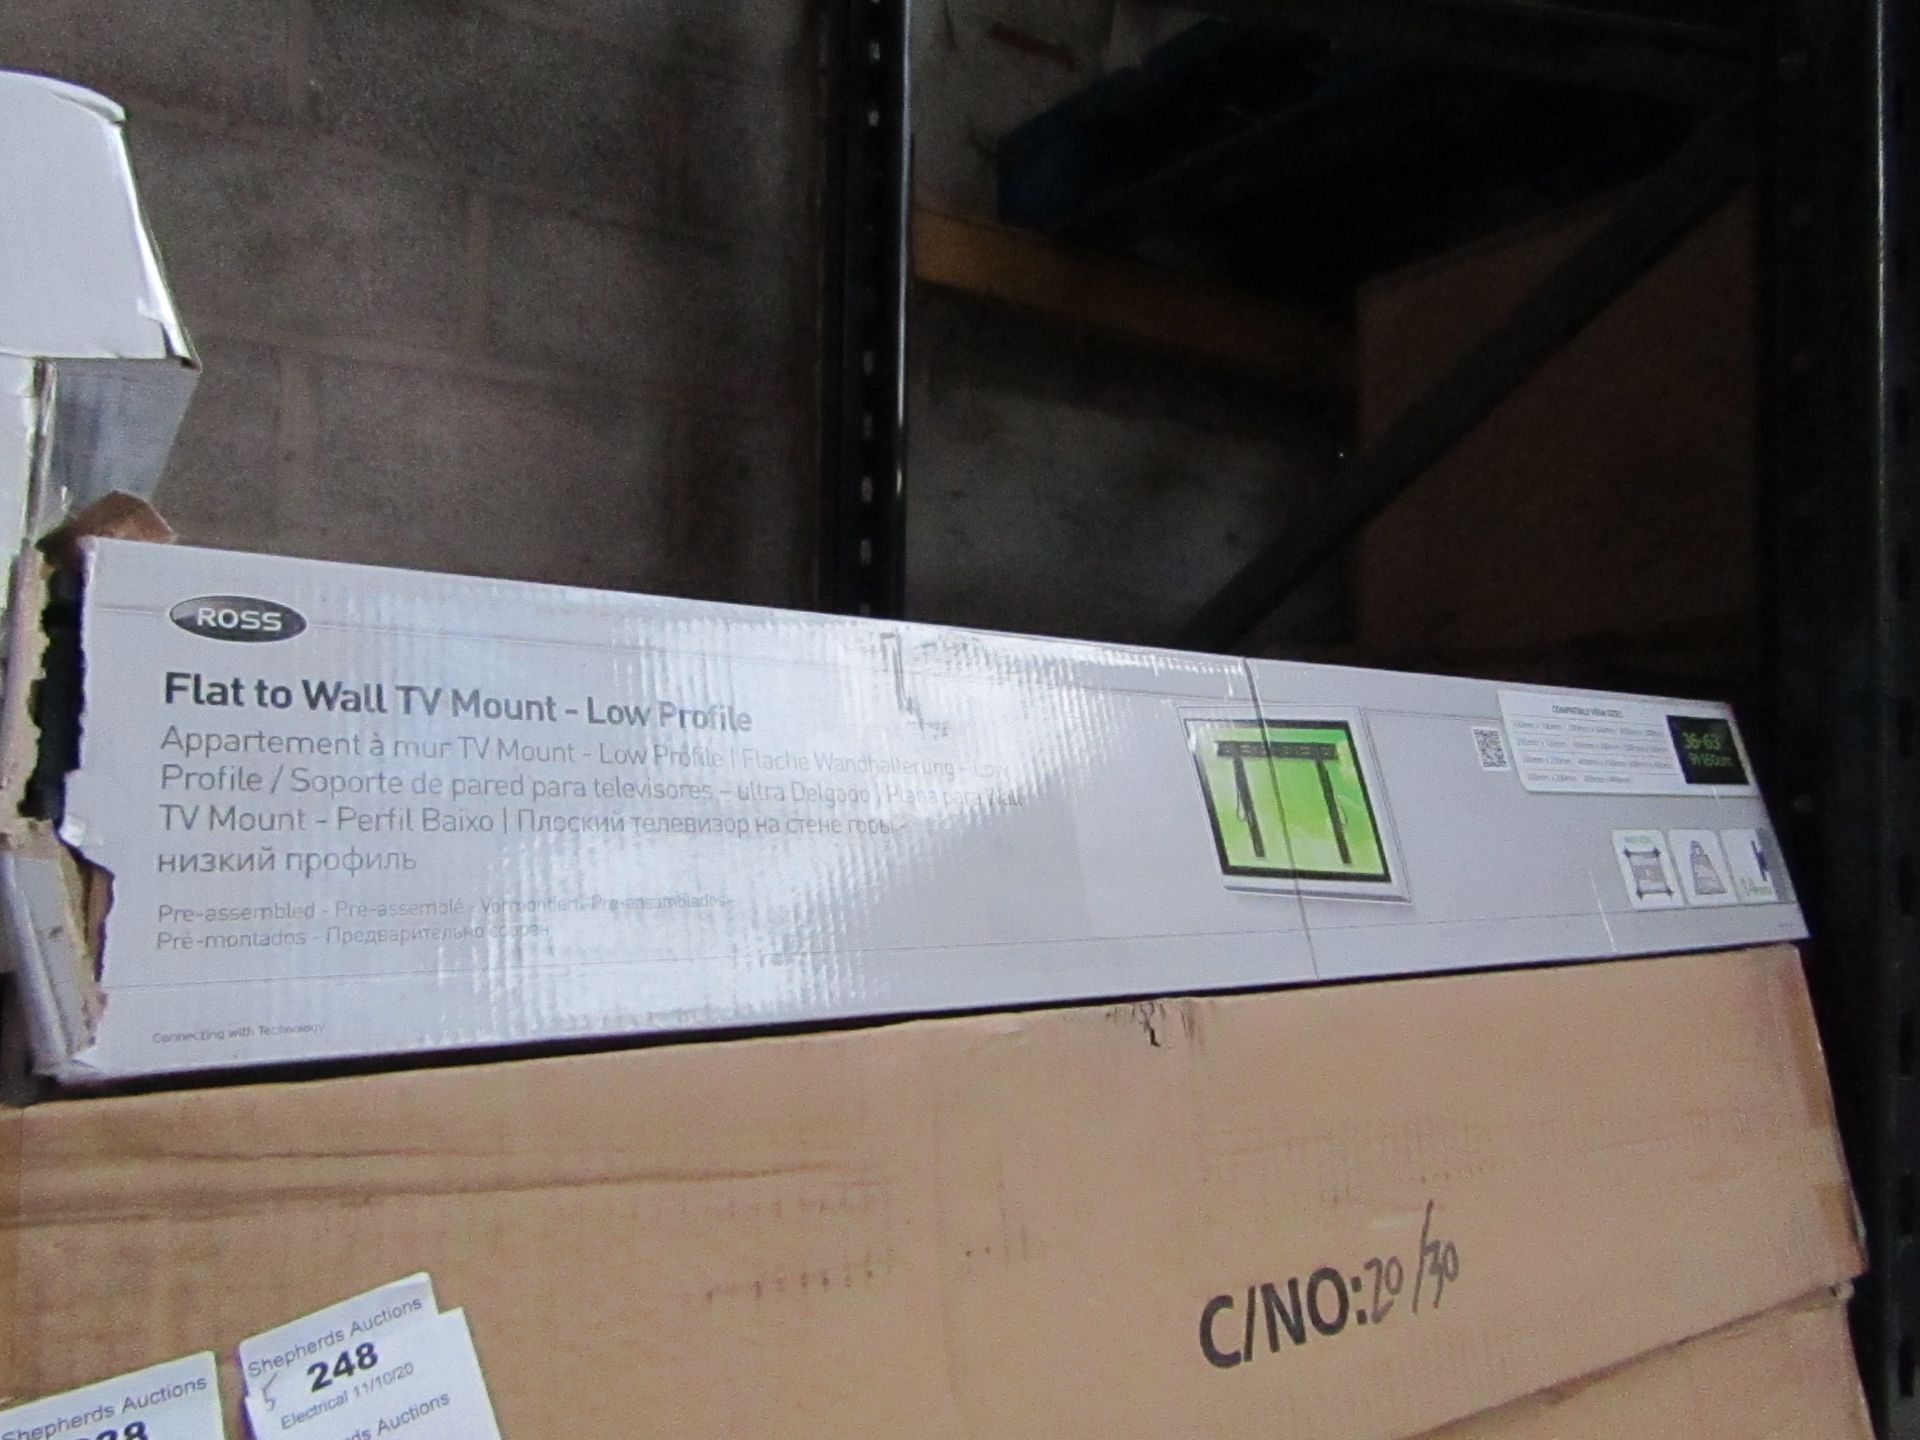 Ross - Flat To Wall TV Mount - Low Profile 36 - 63" - New & Boxed.